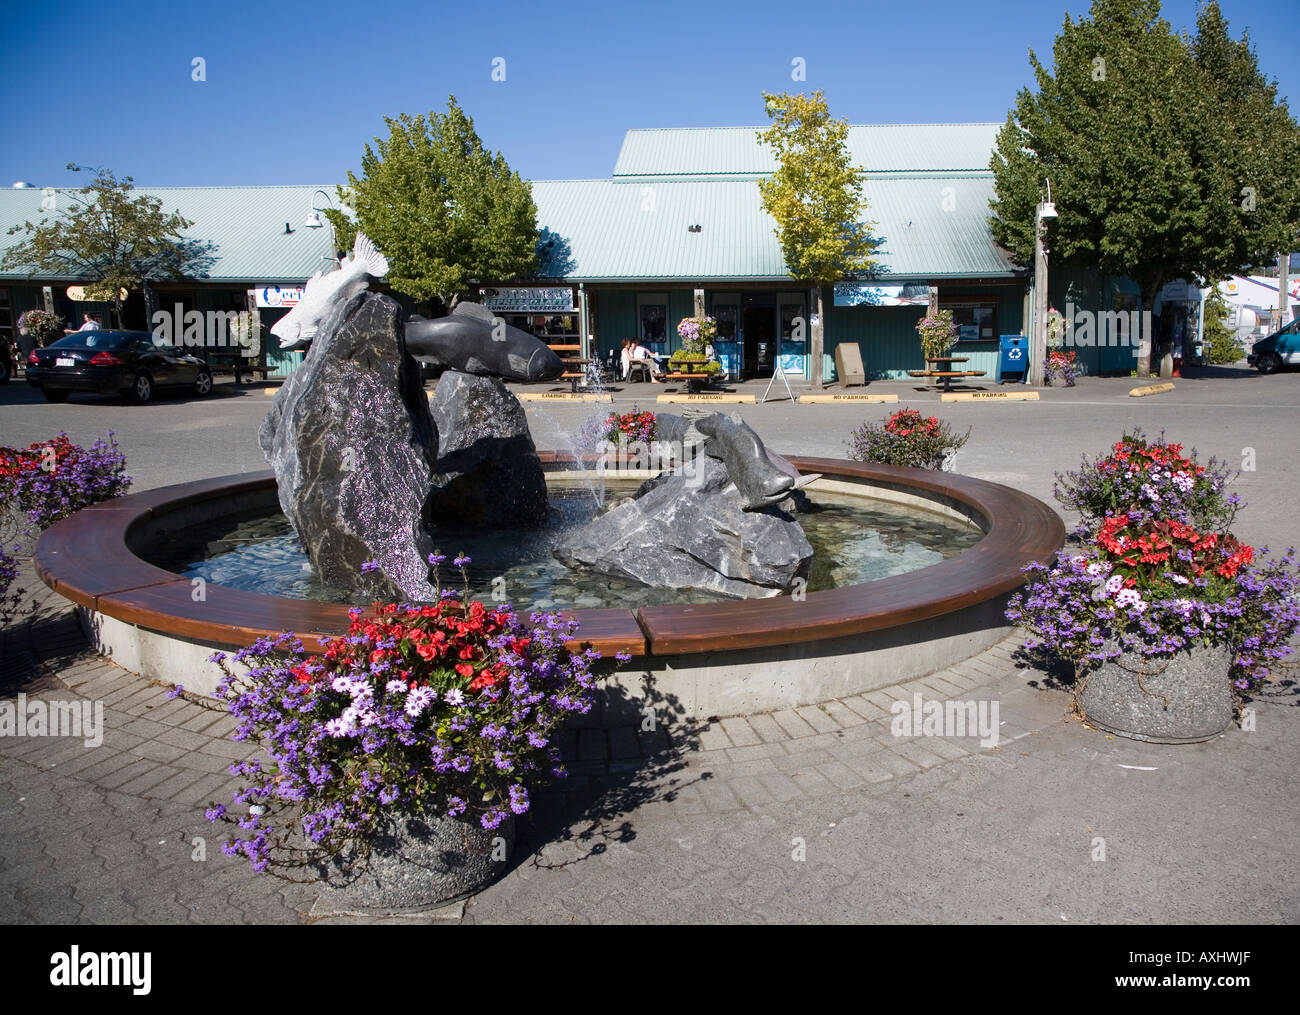 Water feature and fountain in town square with shops Port Alberni Vancouver island Canada Stock Photo